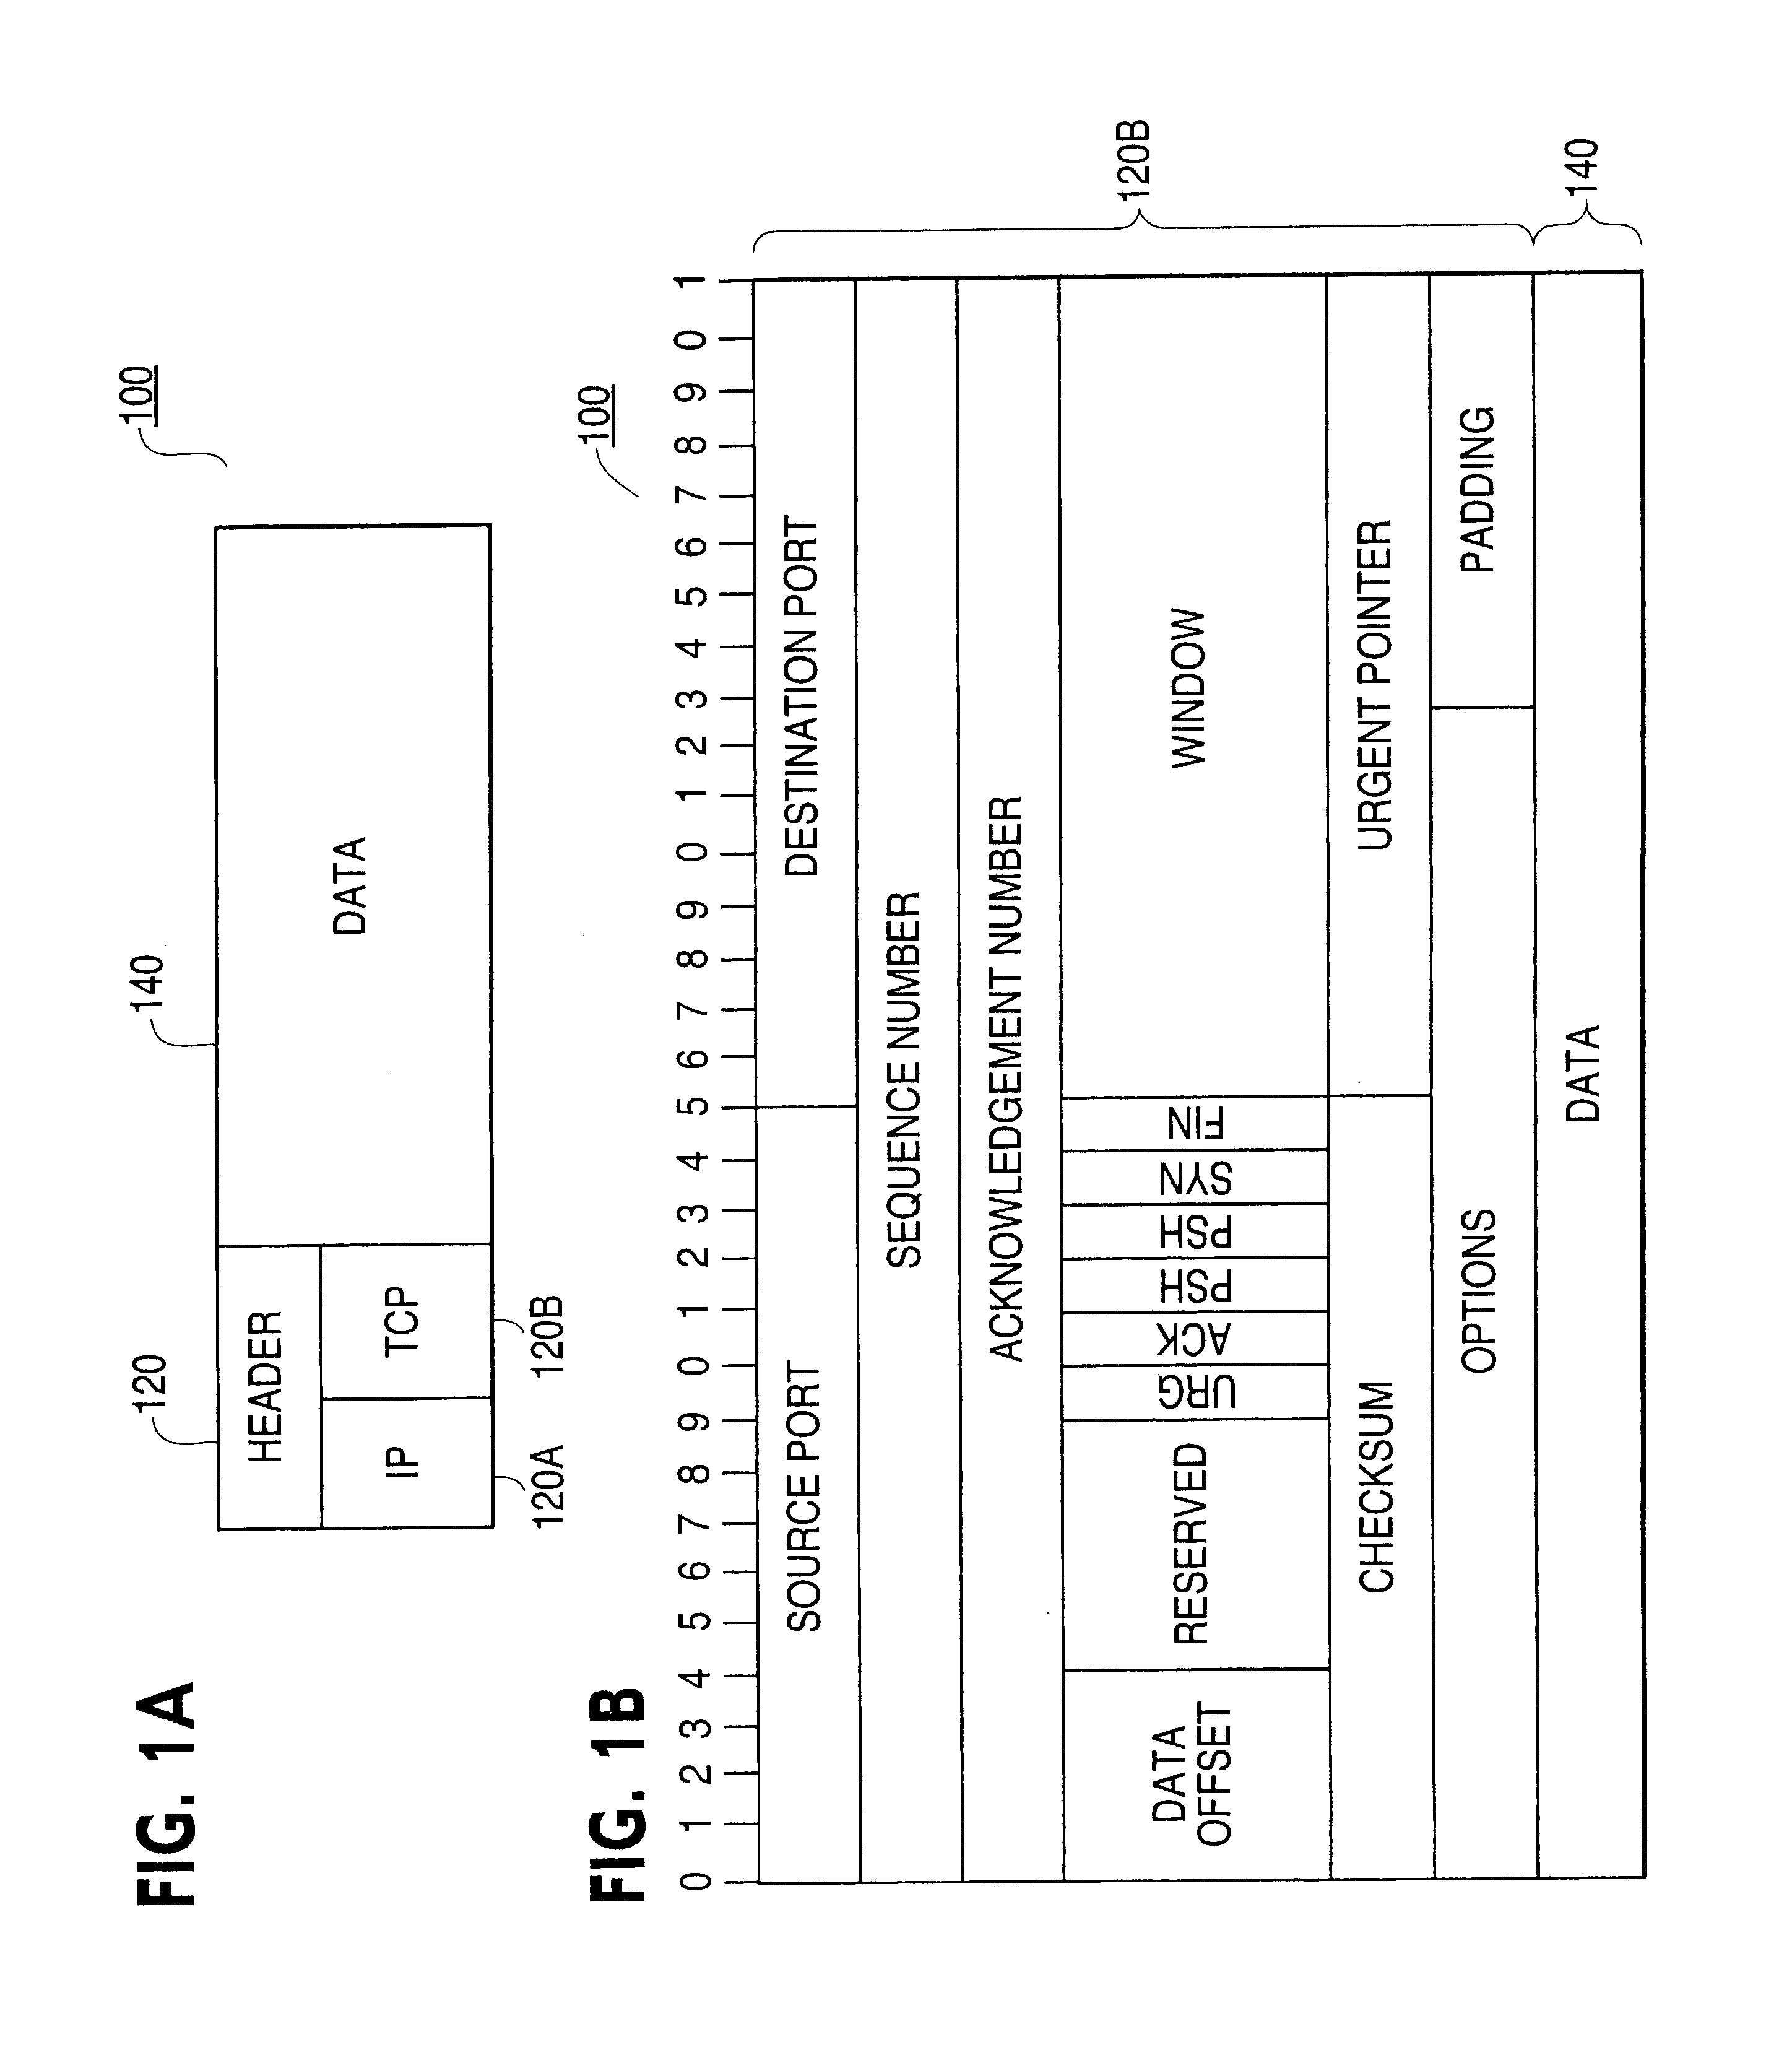 Performance enhancement of transmission control protocol (TCP) for wireless network applications